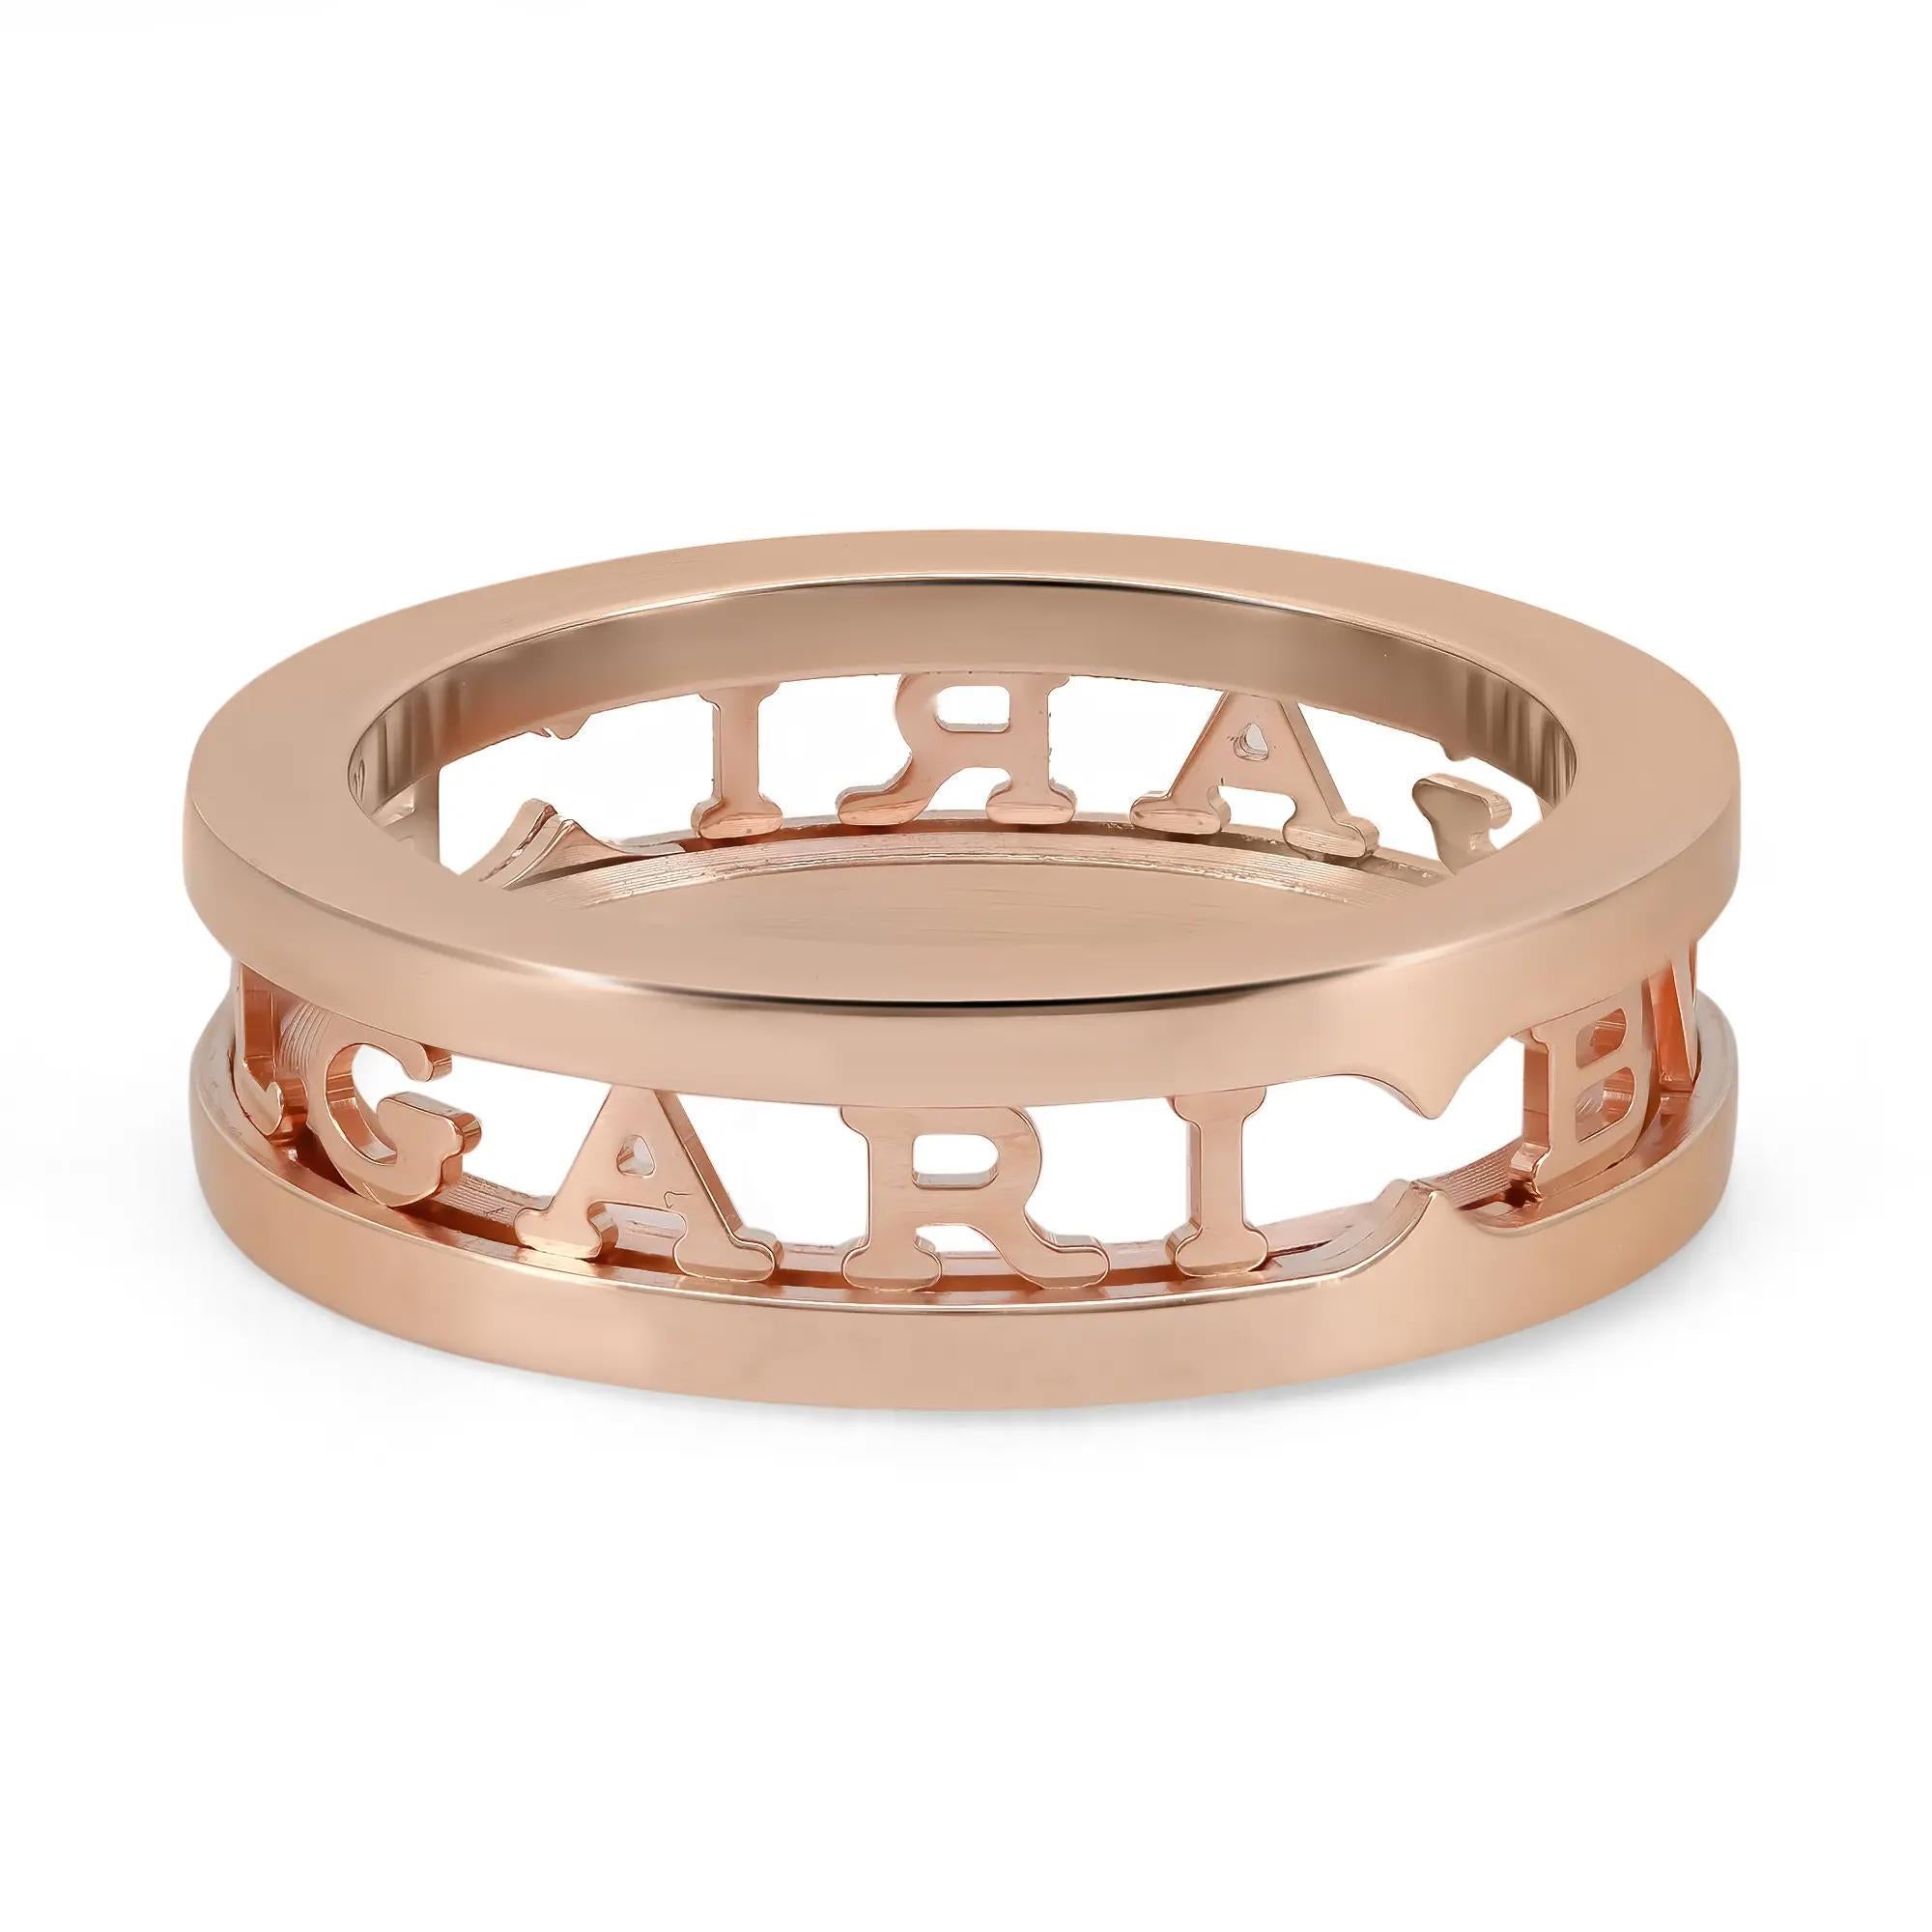 Fabulous and chic, this Bvlgari B.Zero1 band ring is a ground-breaking statement of Bulgari’s creative vision. Crafted in lustrous 18K rose gold. It features the iconic BVLGARI logo as a bold element of design in a one-band openwork spiral ring.